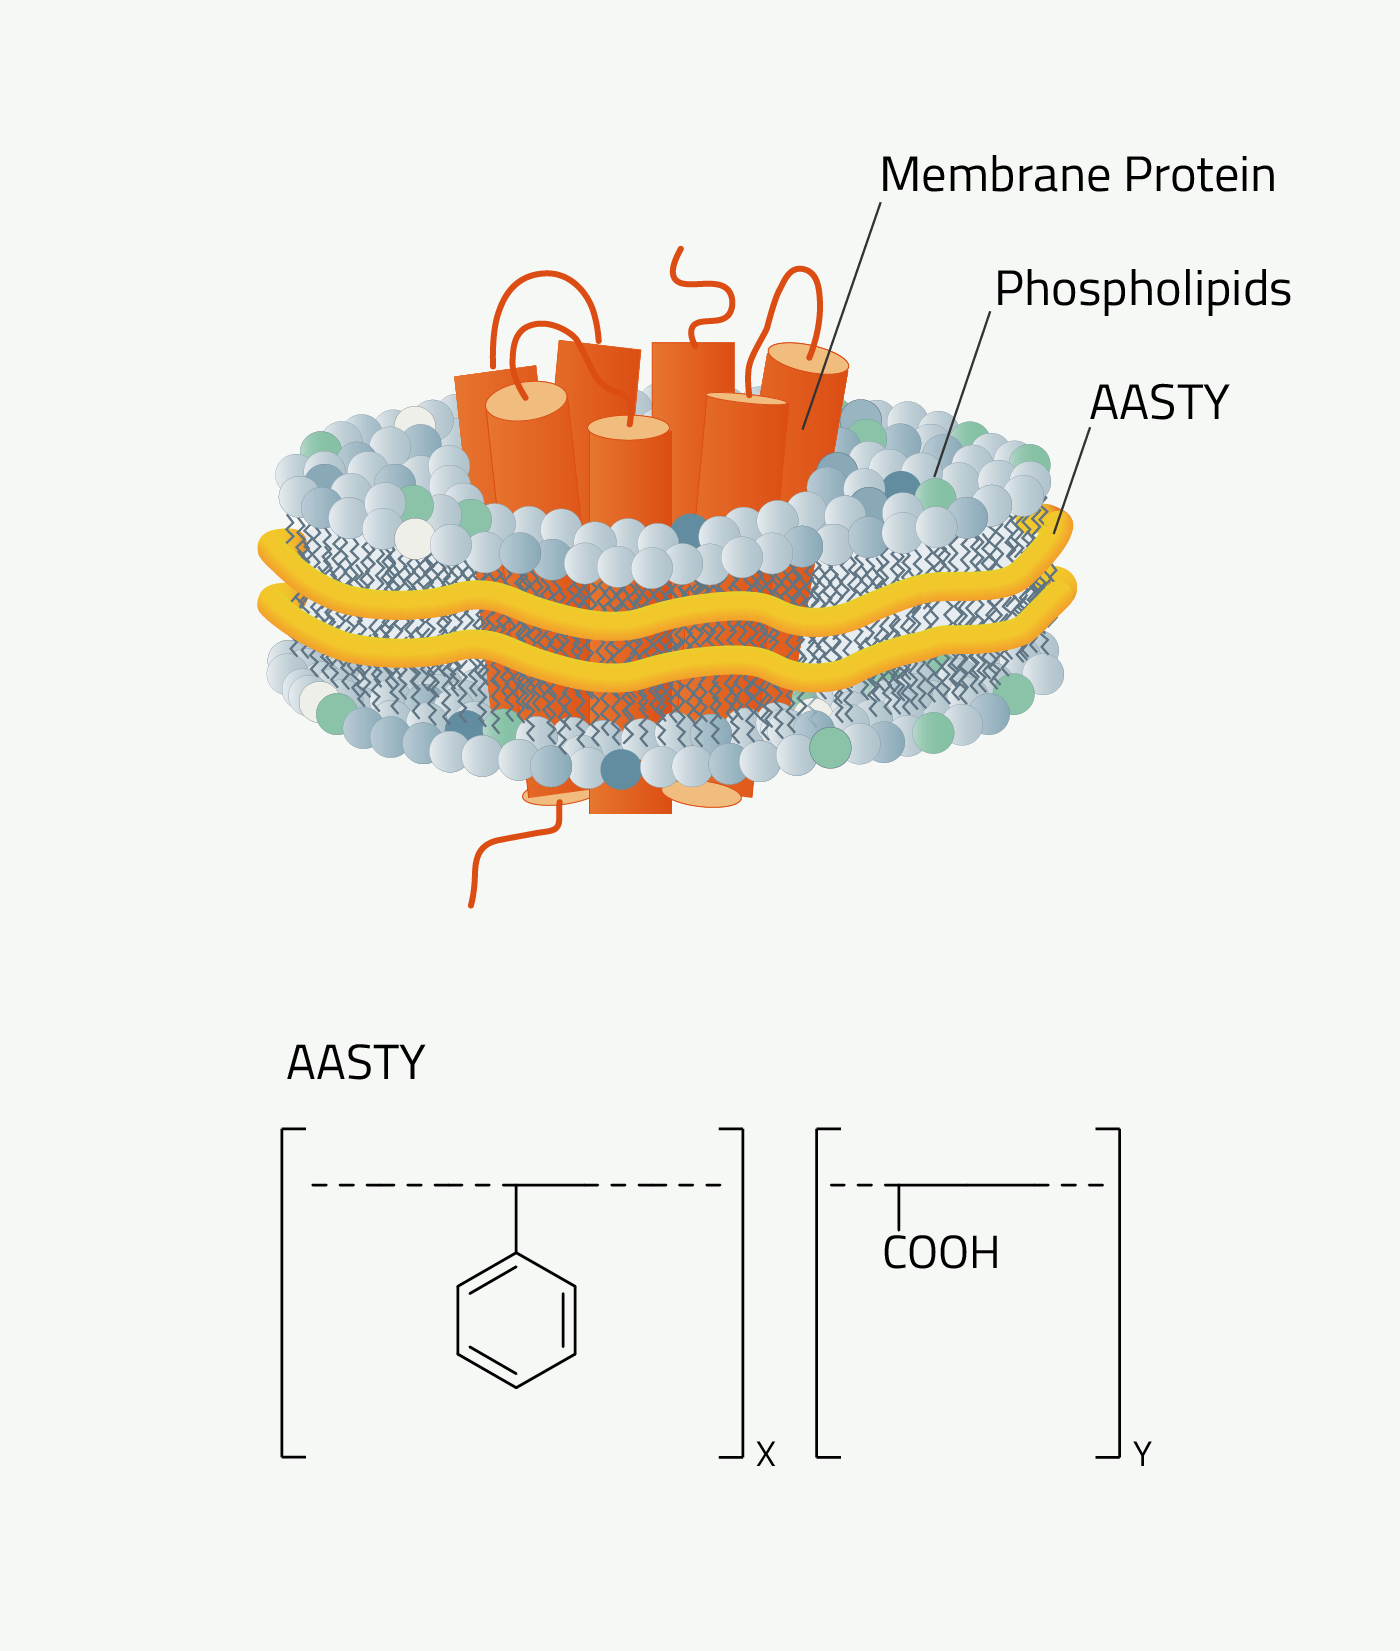 Cutout membrane protein surrounded by AASTY